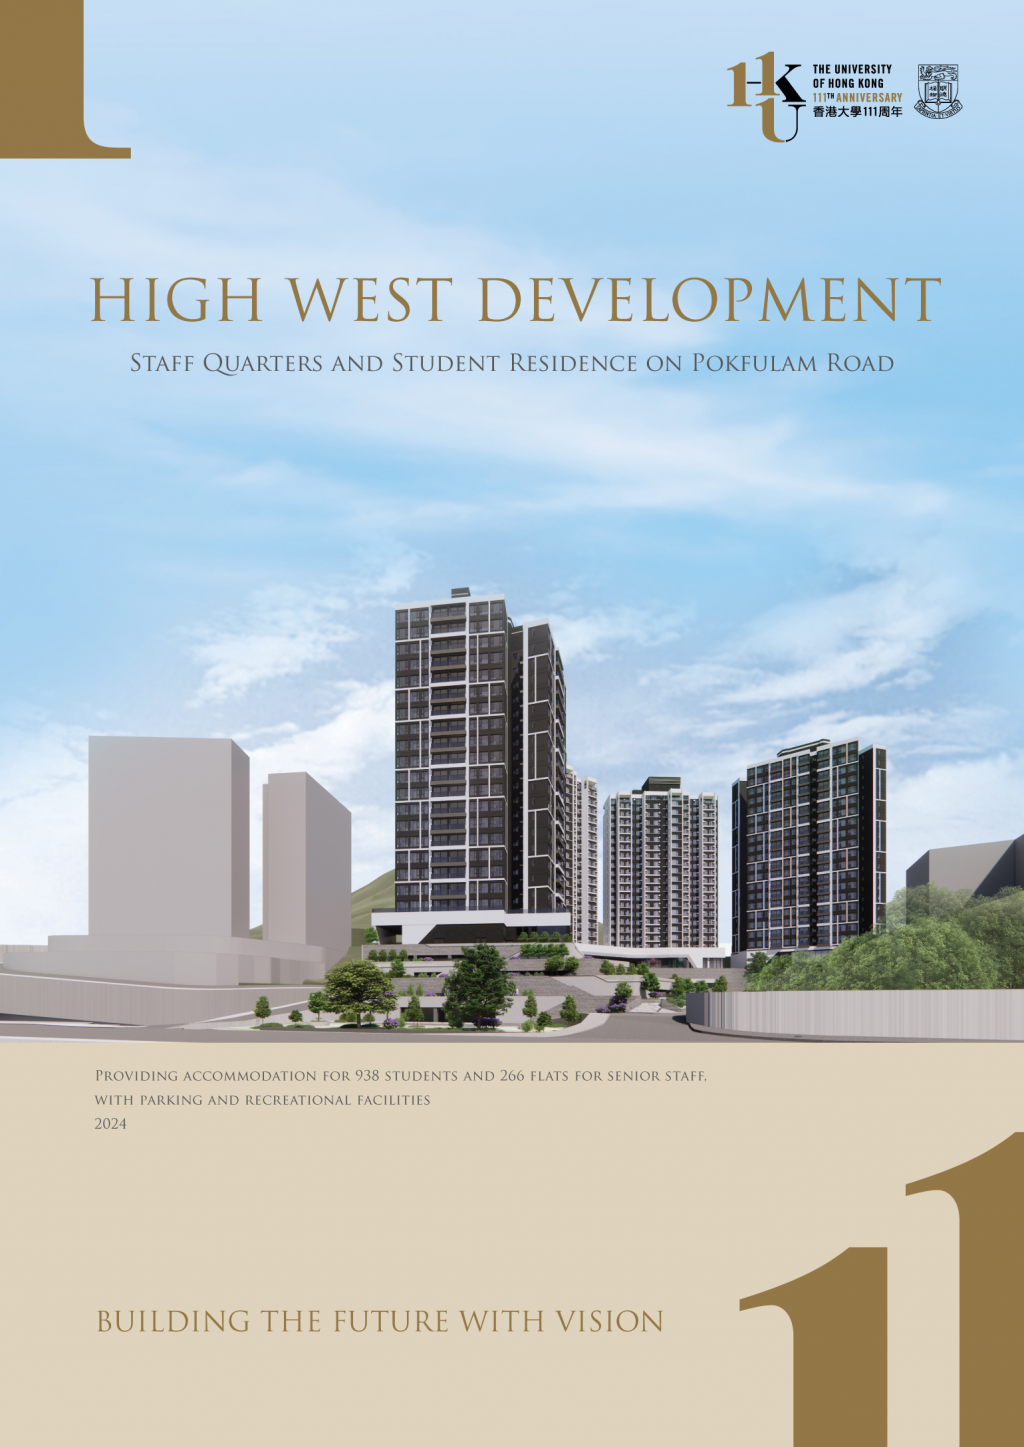 High West Development - Staff Quarters and Student Residence on Pokfulam Road